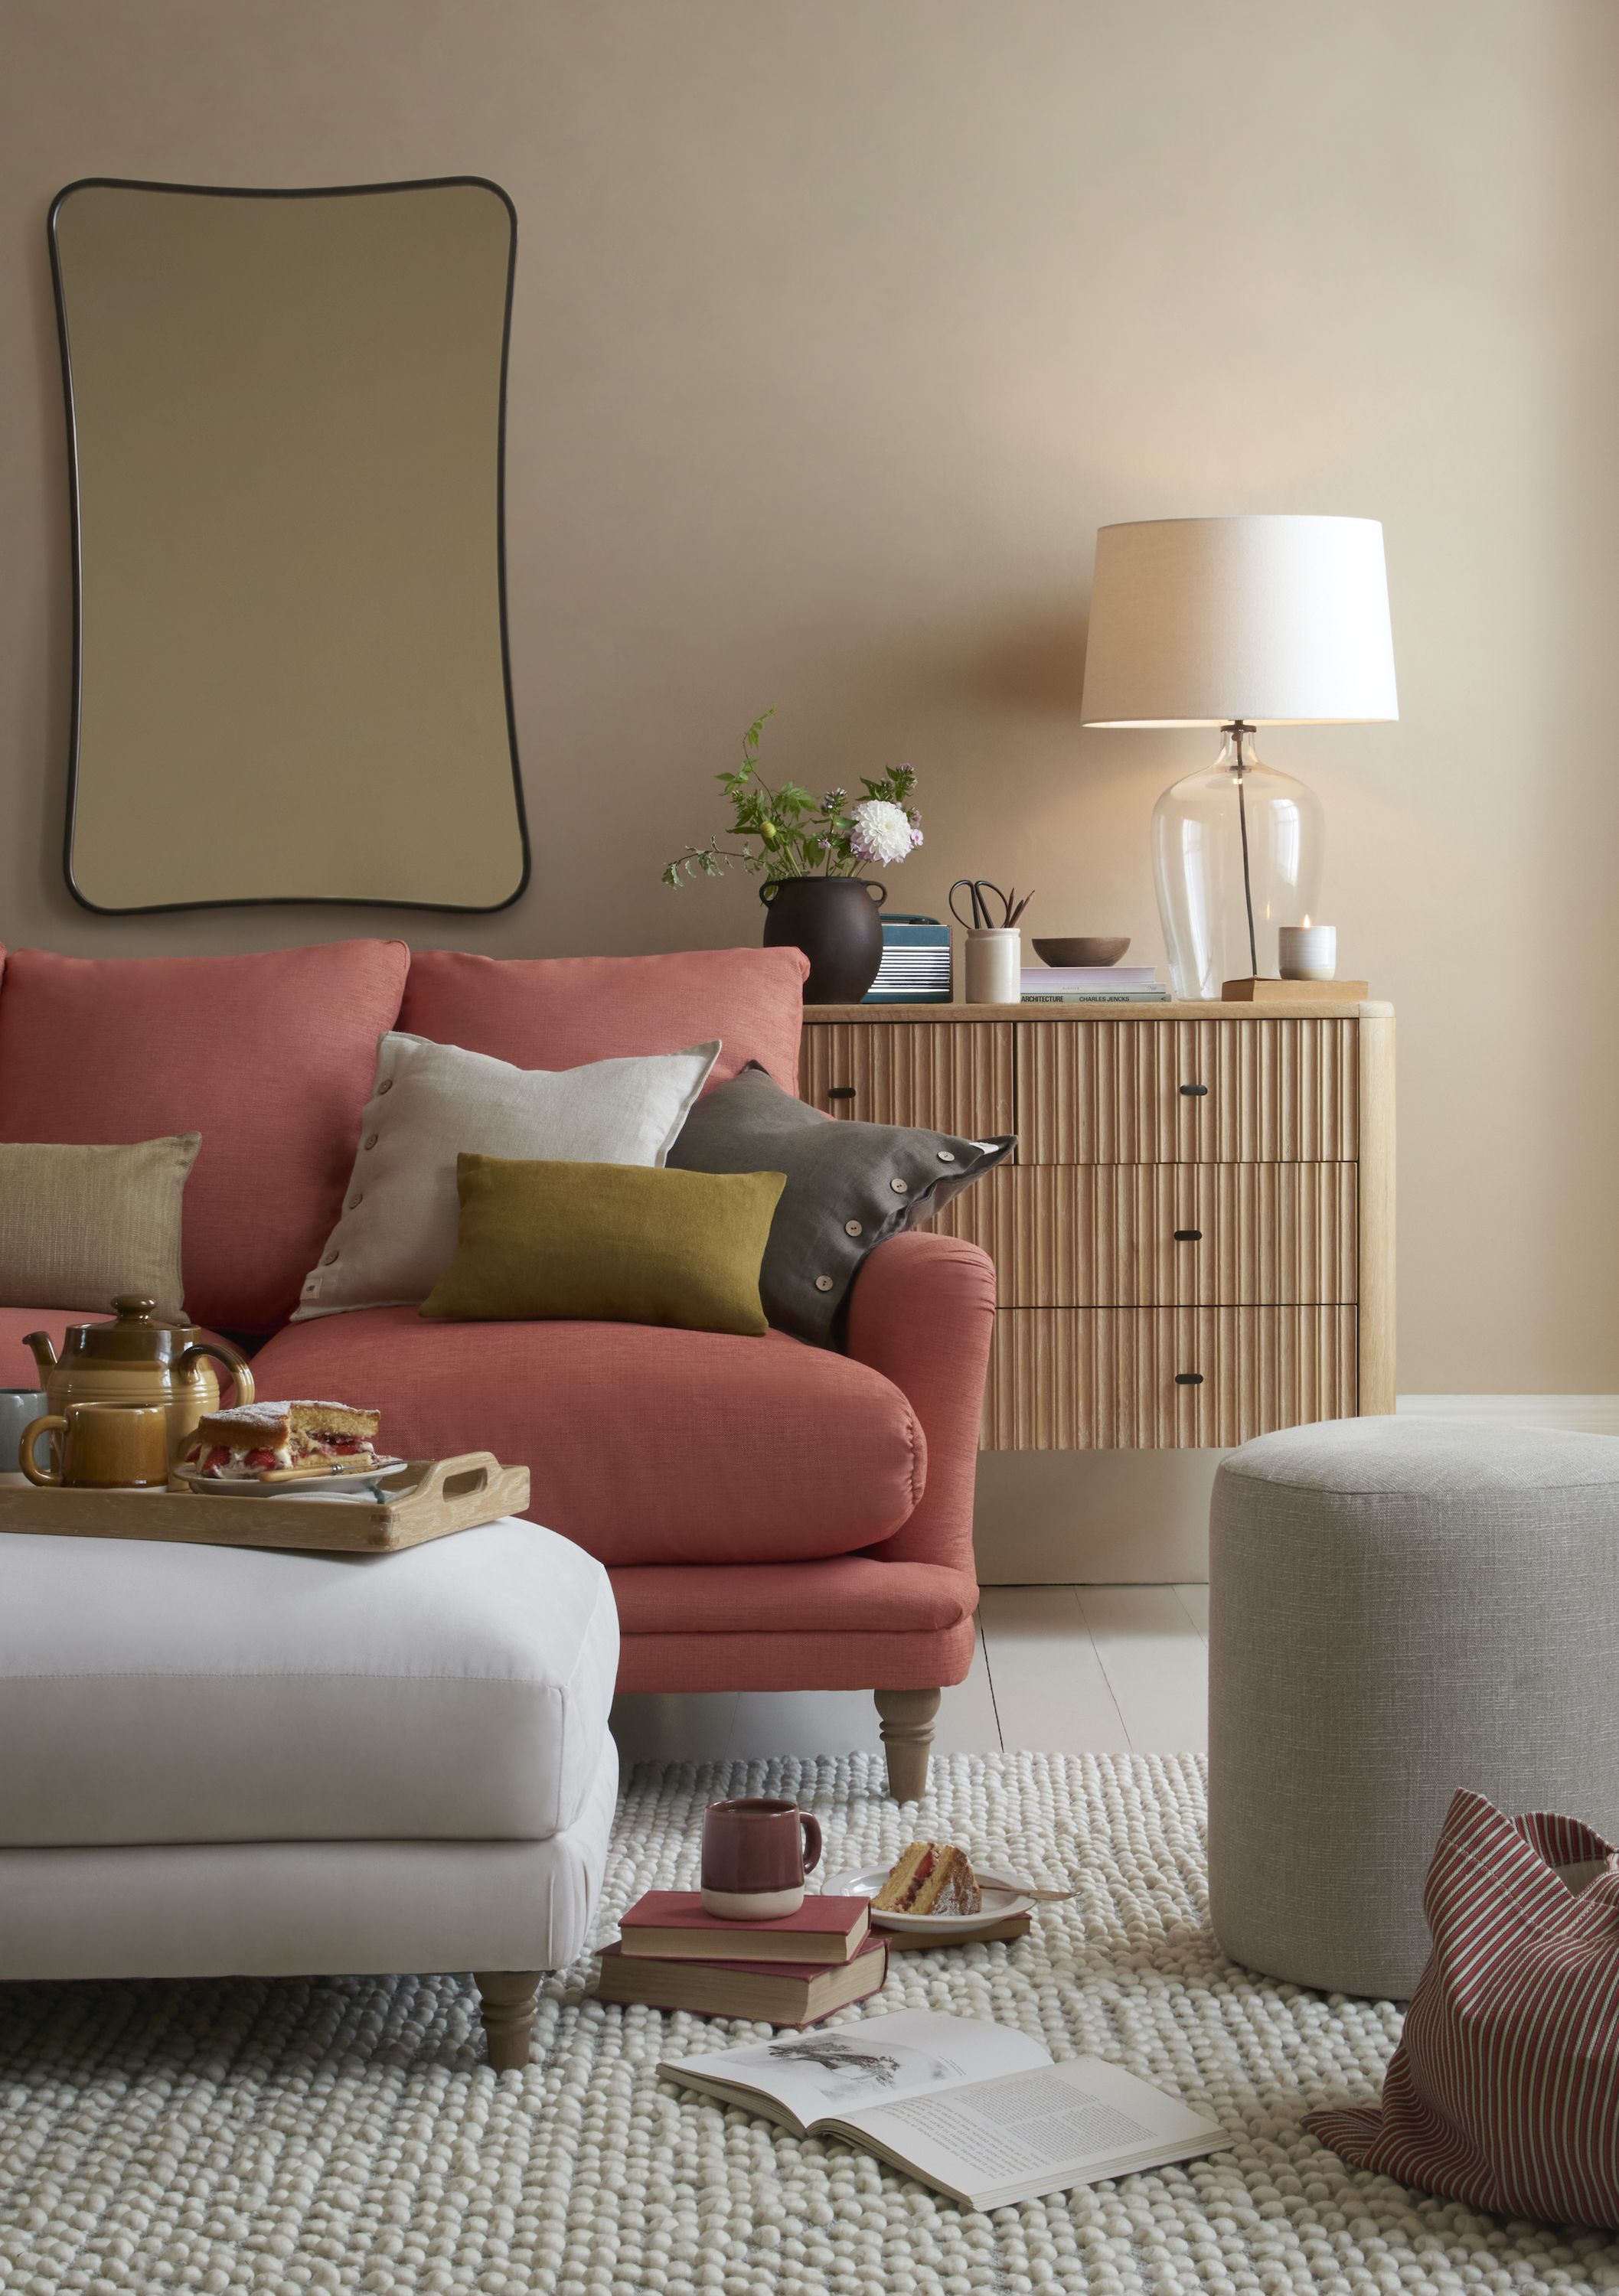 11 Cozy Paint Colors to Warm Up a Room